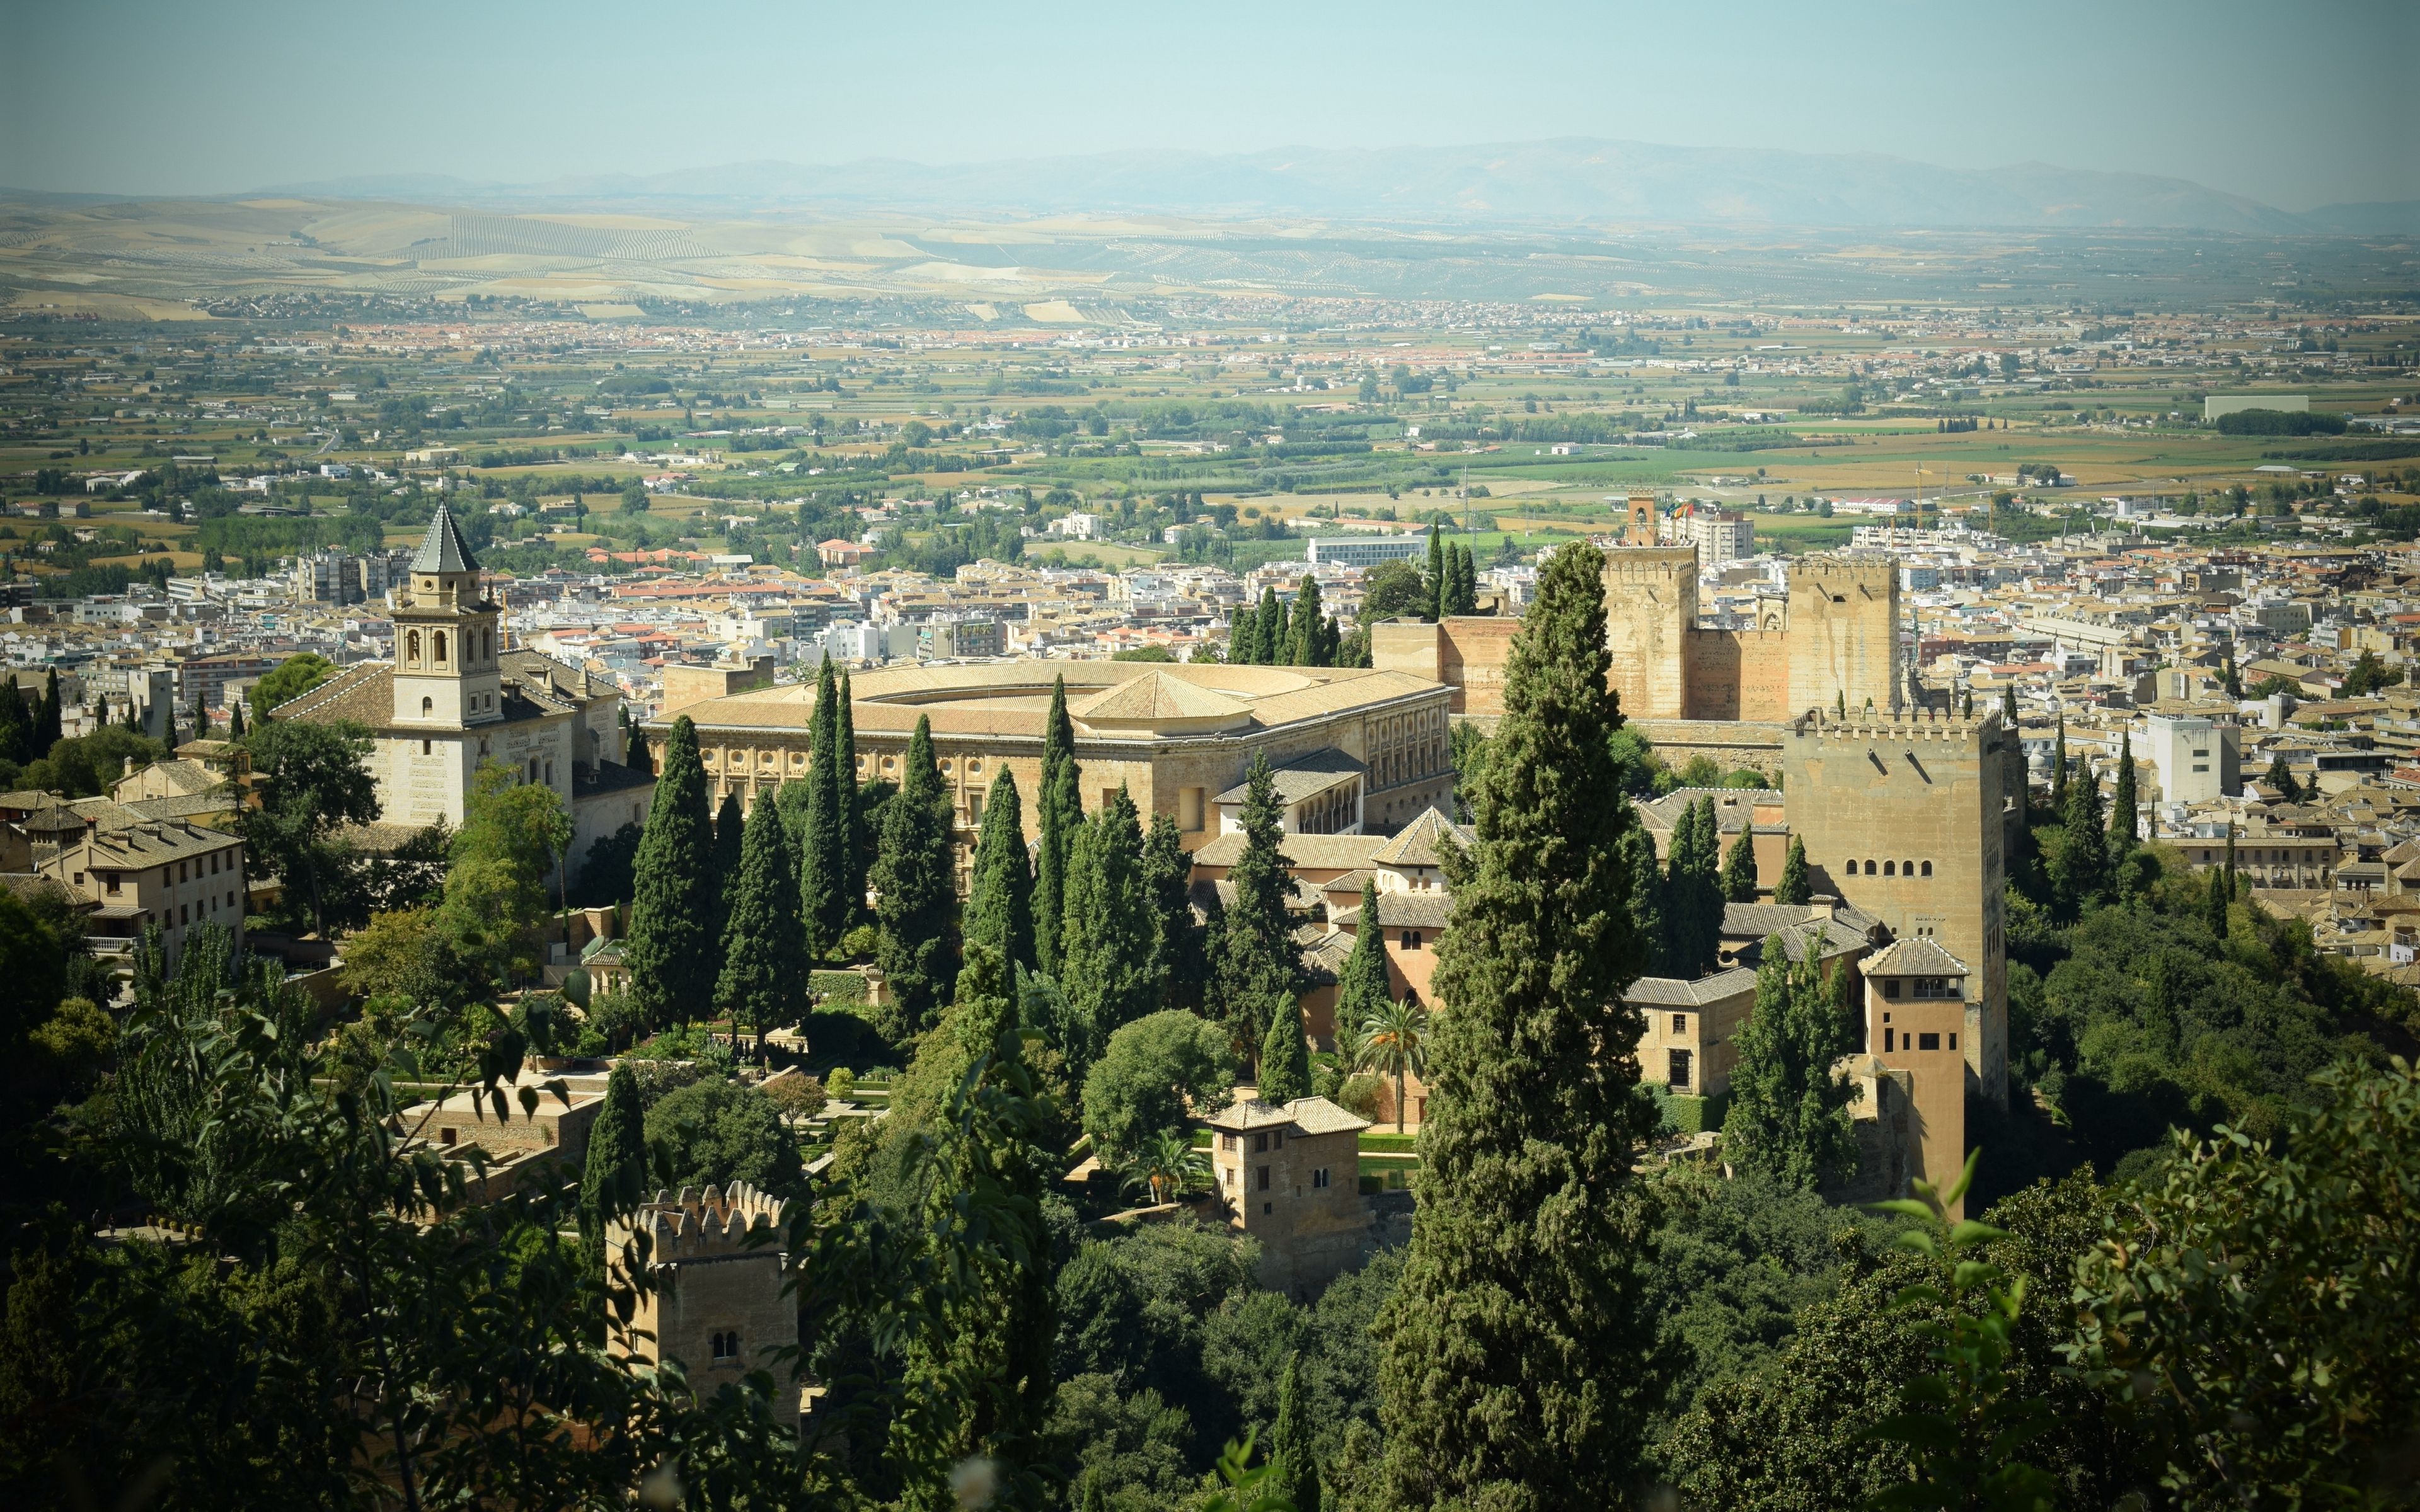 Wallpaper Blink of Alhambra Wallpaper HD for Android